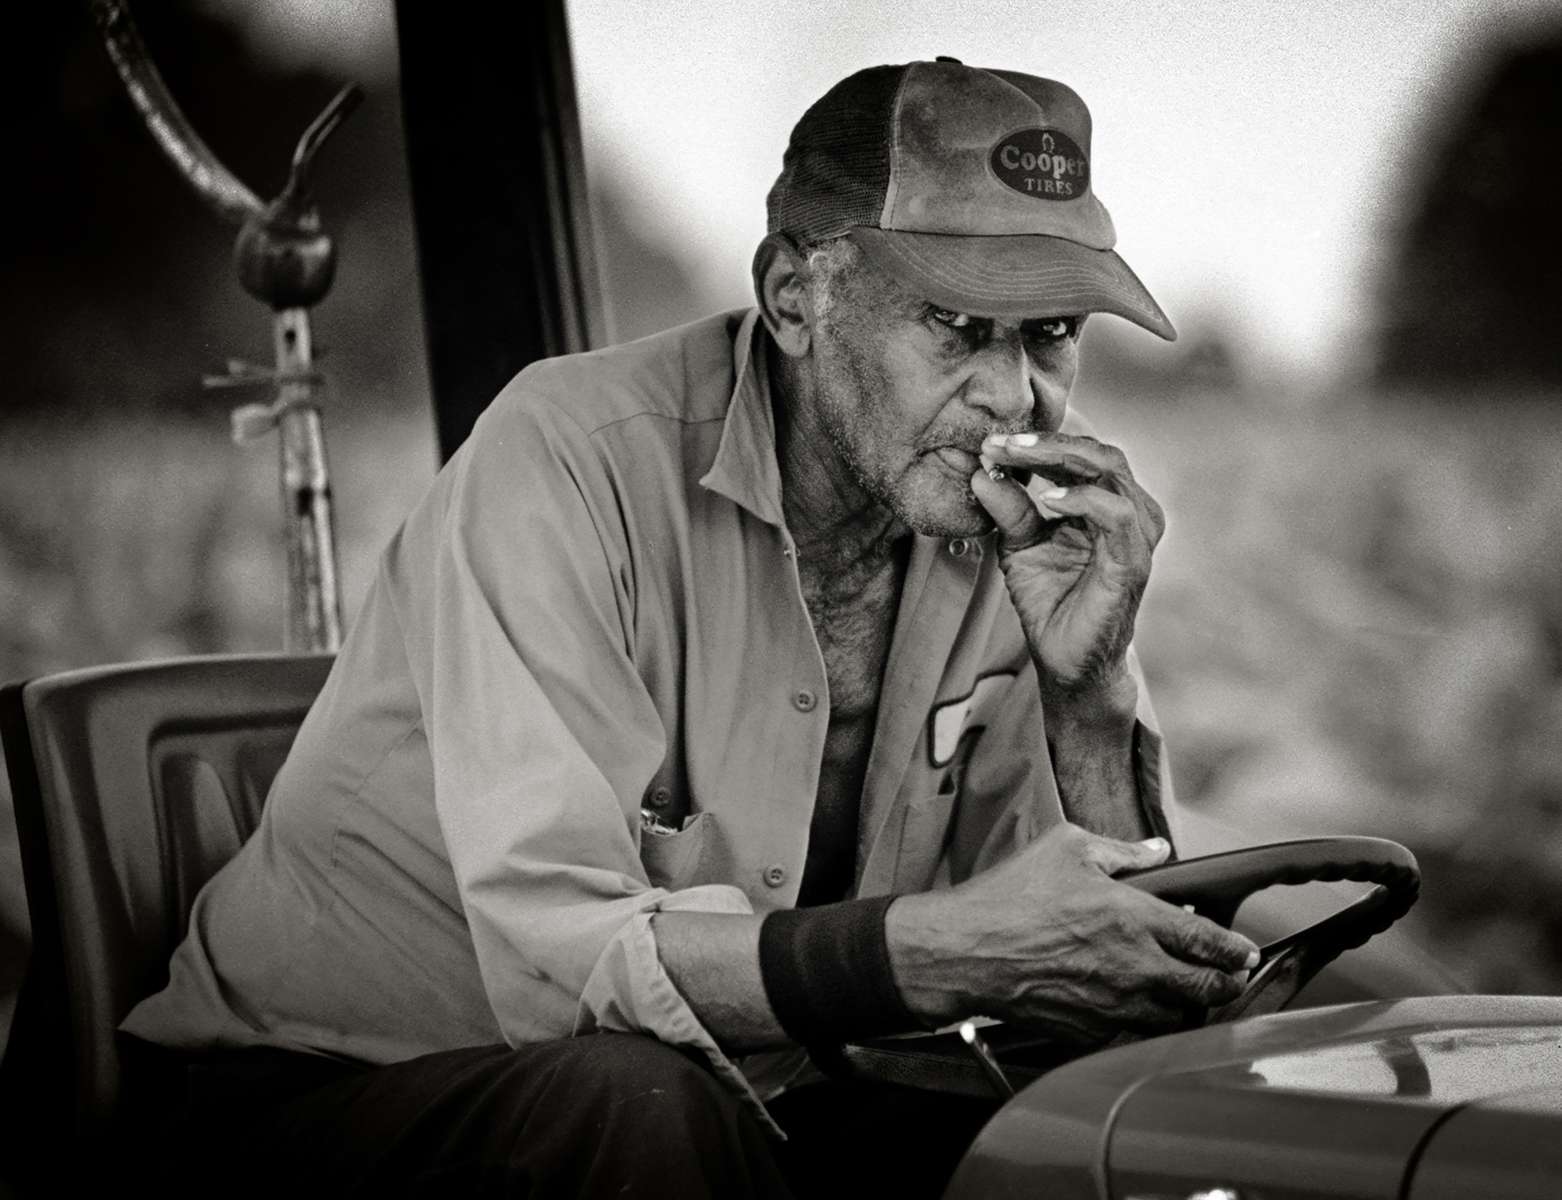 (7/29/97 STANCILL)Les Mix, 76, who has labored on tobacco farms most of his life, takes a smoke break. CHRISTOPHER A. RECORD/Staff